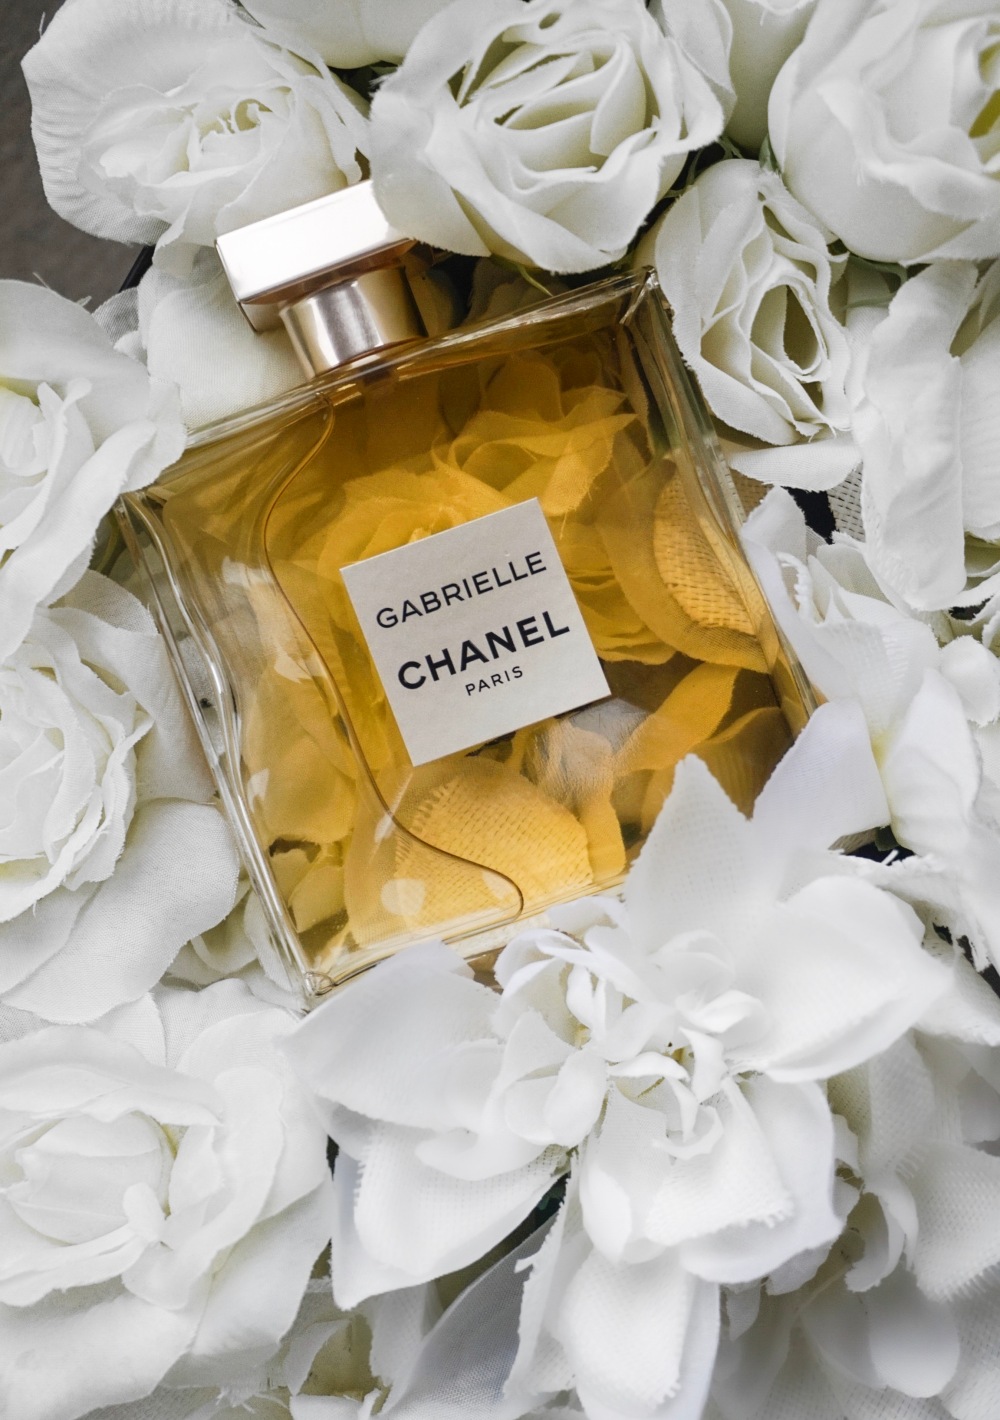 Scent Of Gabrielle – The new fragrance by Chanel – Mihaela Stoyanova